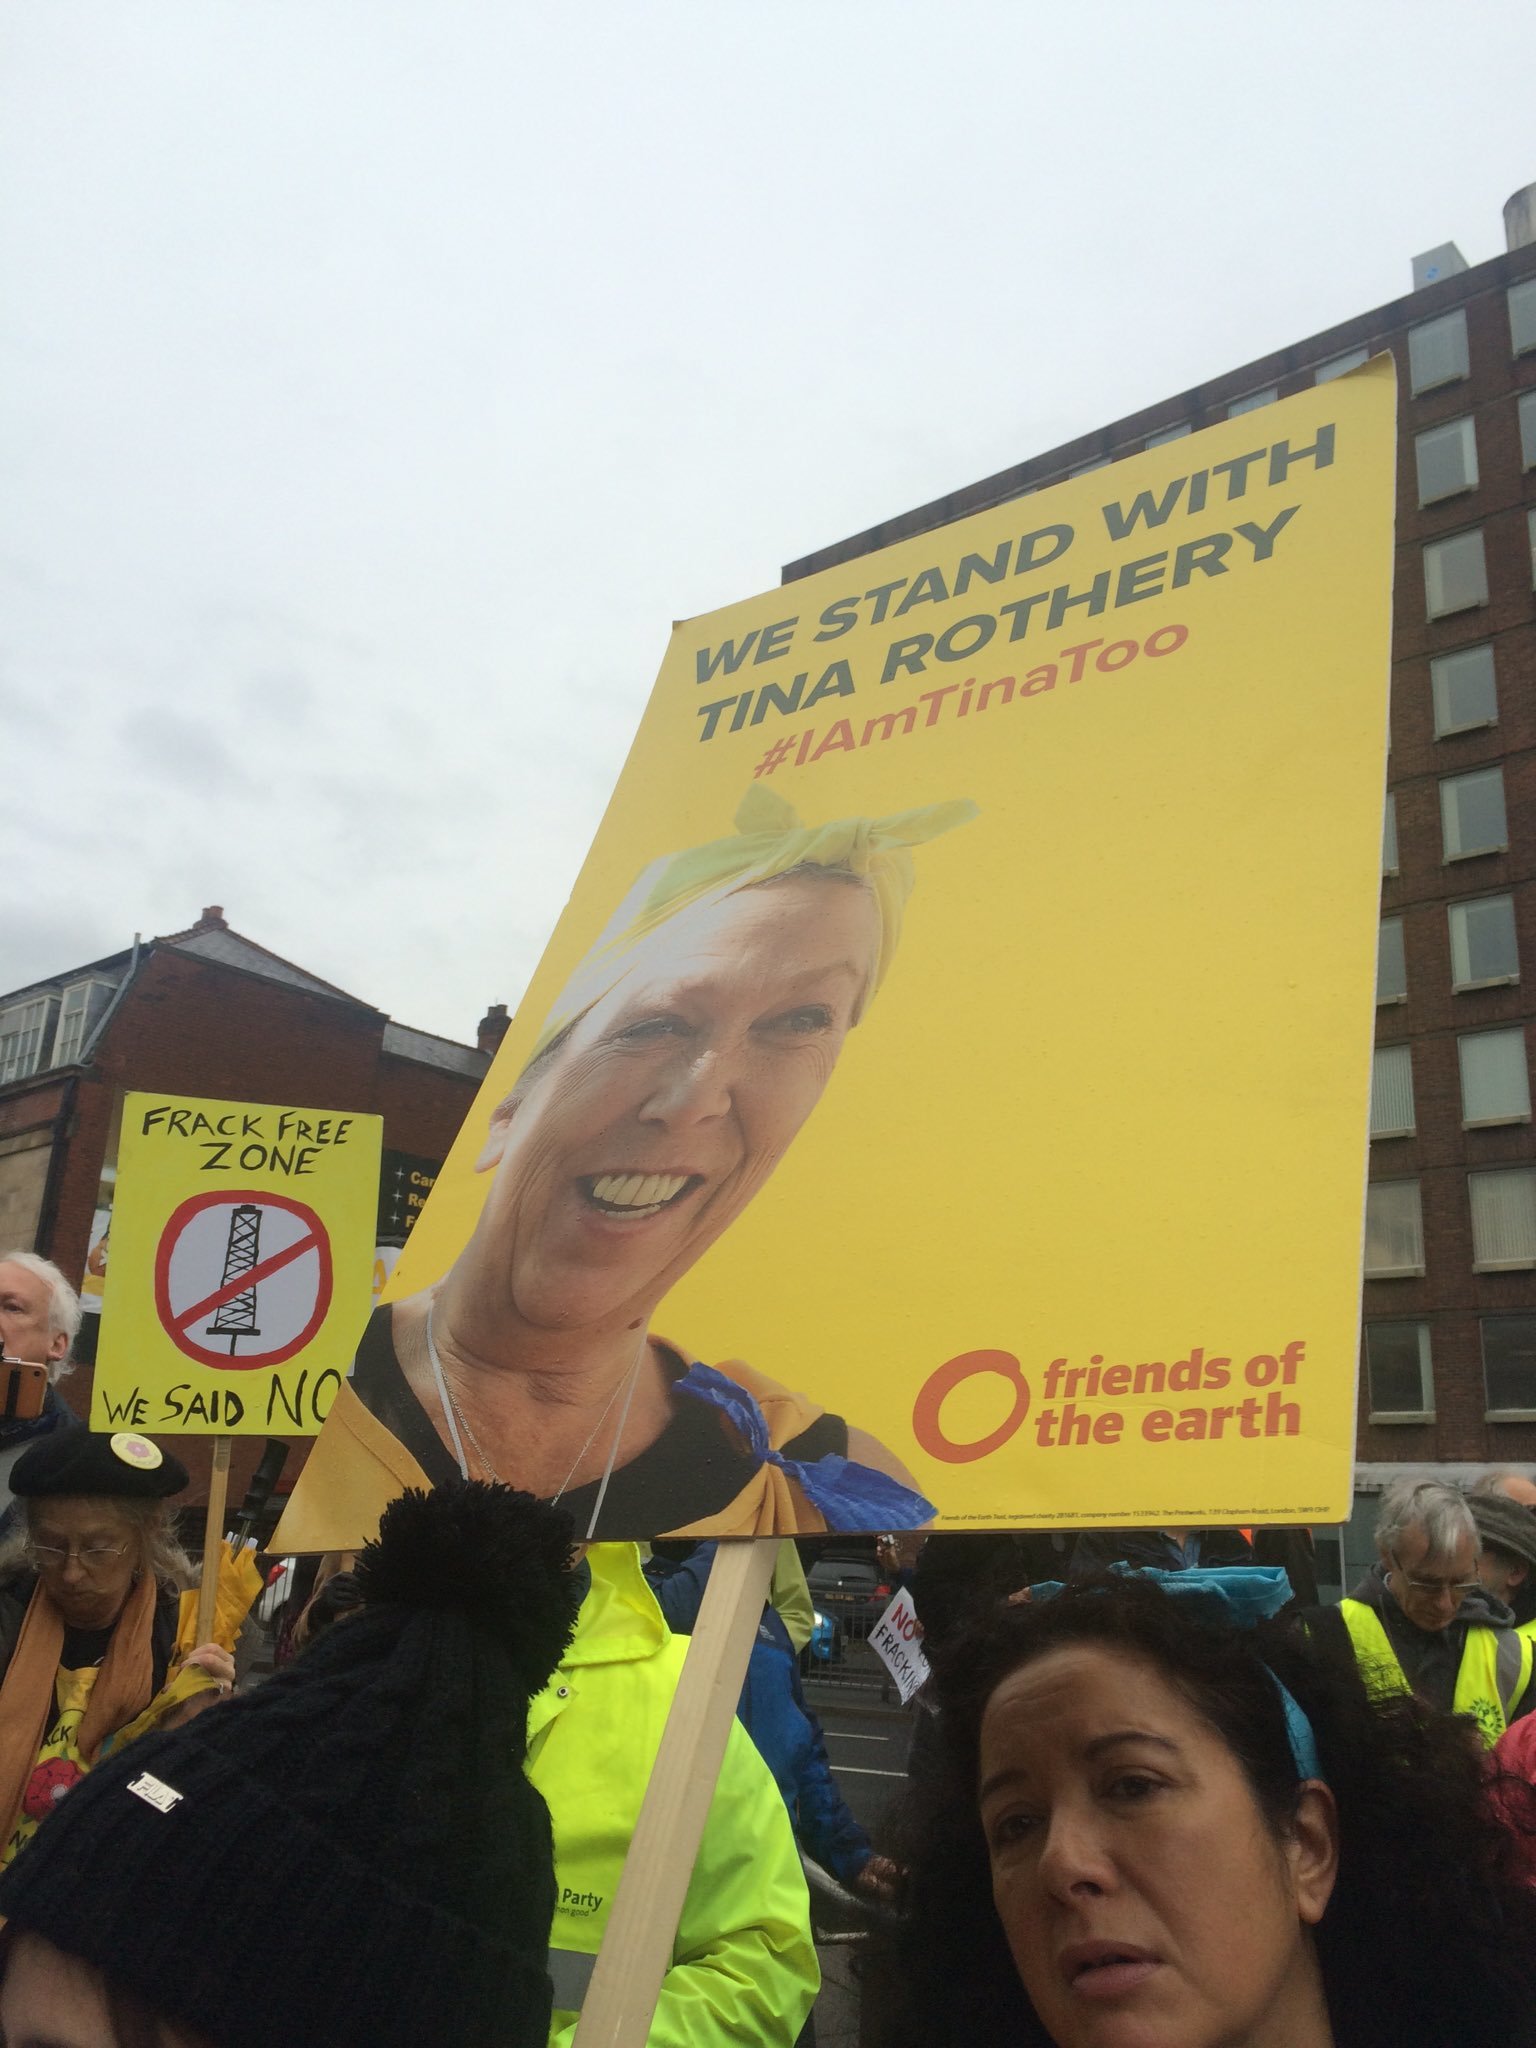 Campaigners backing Tina Rothery